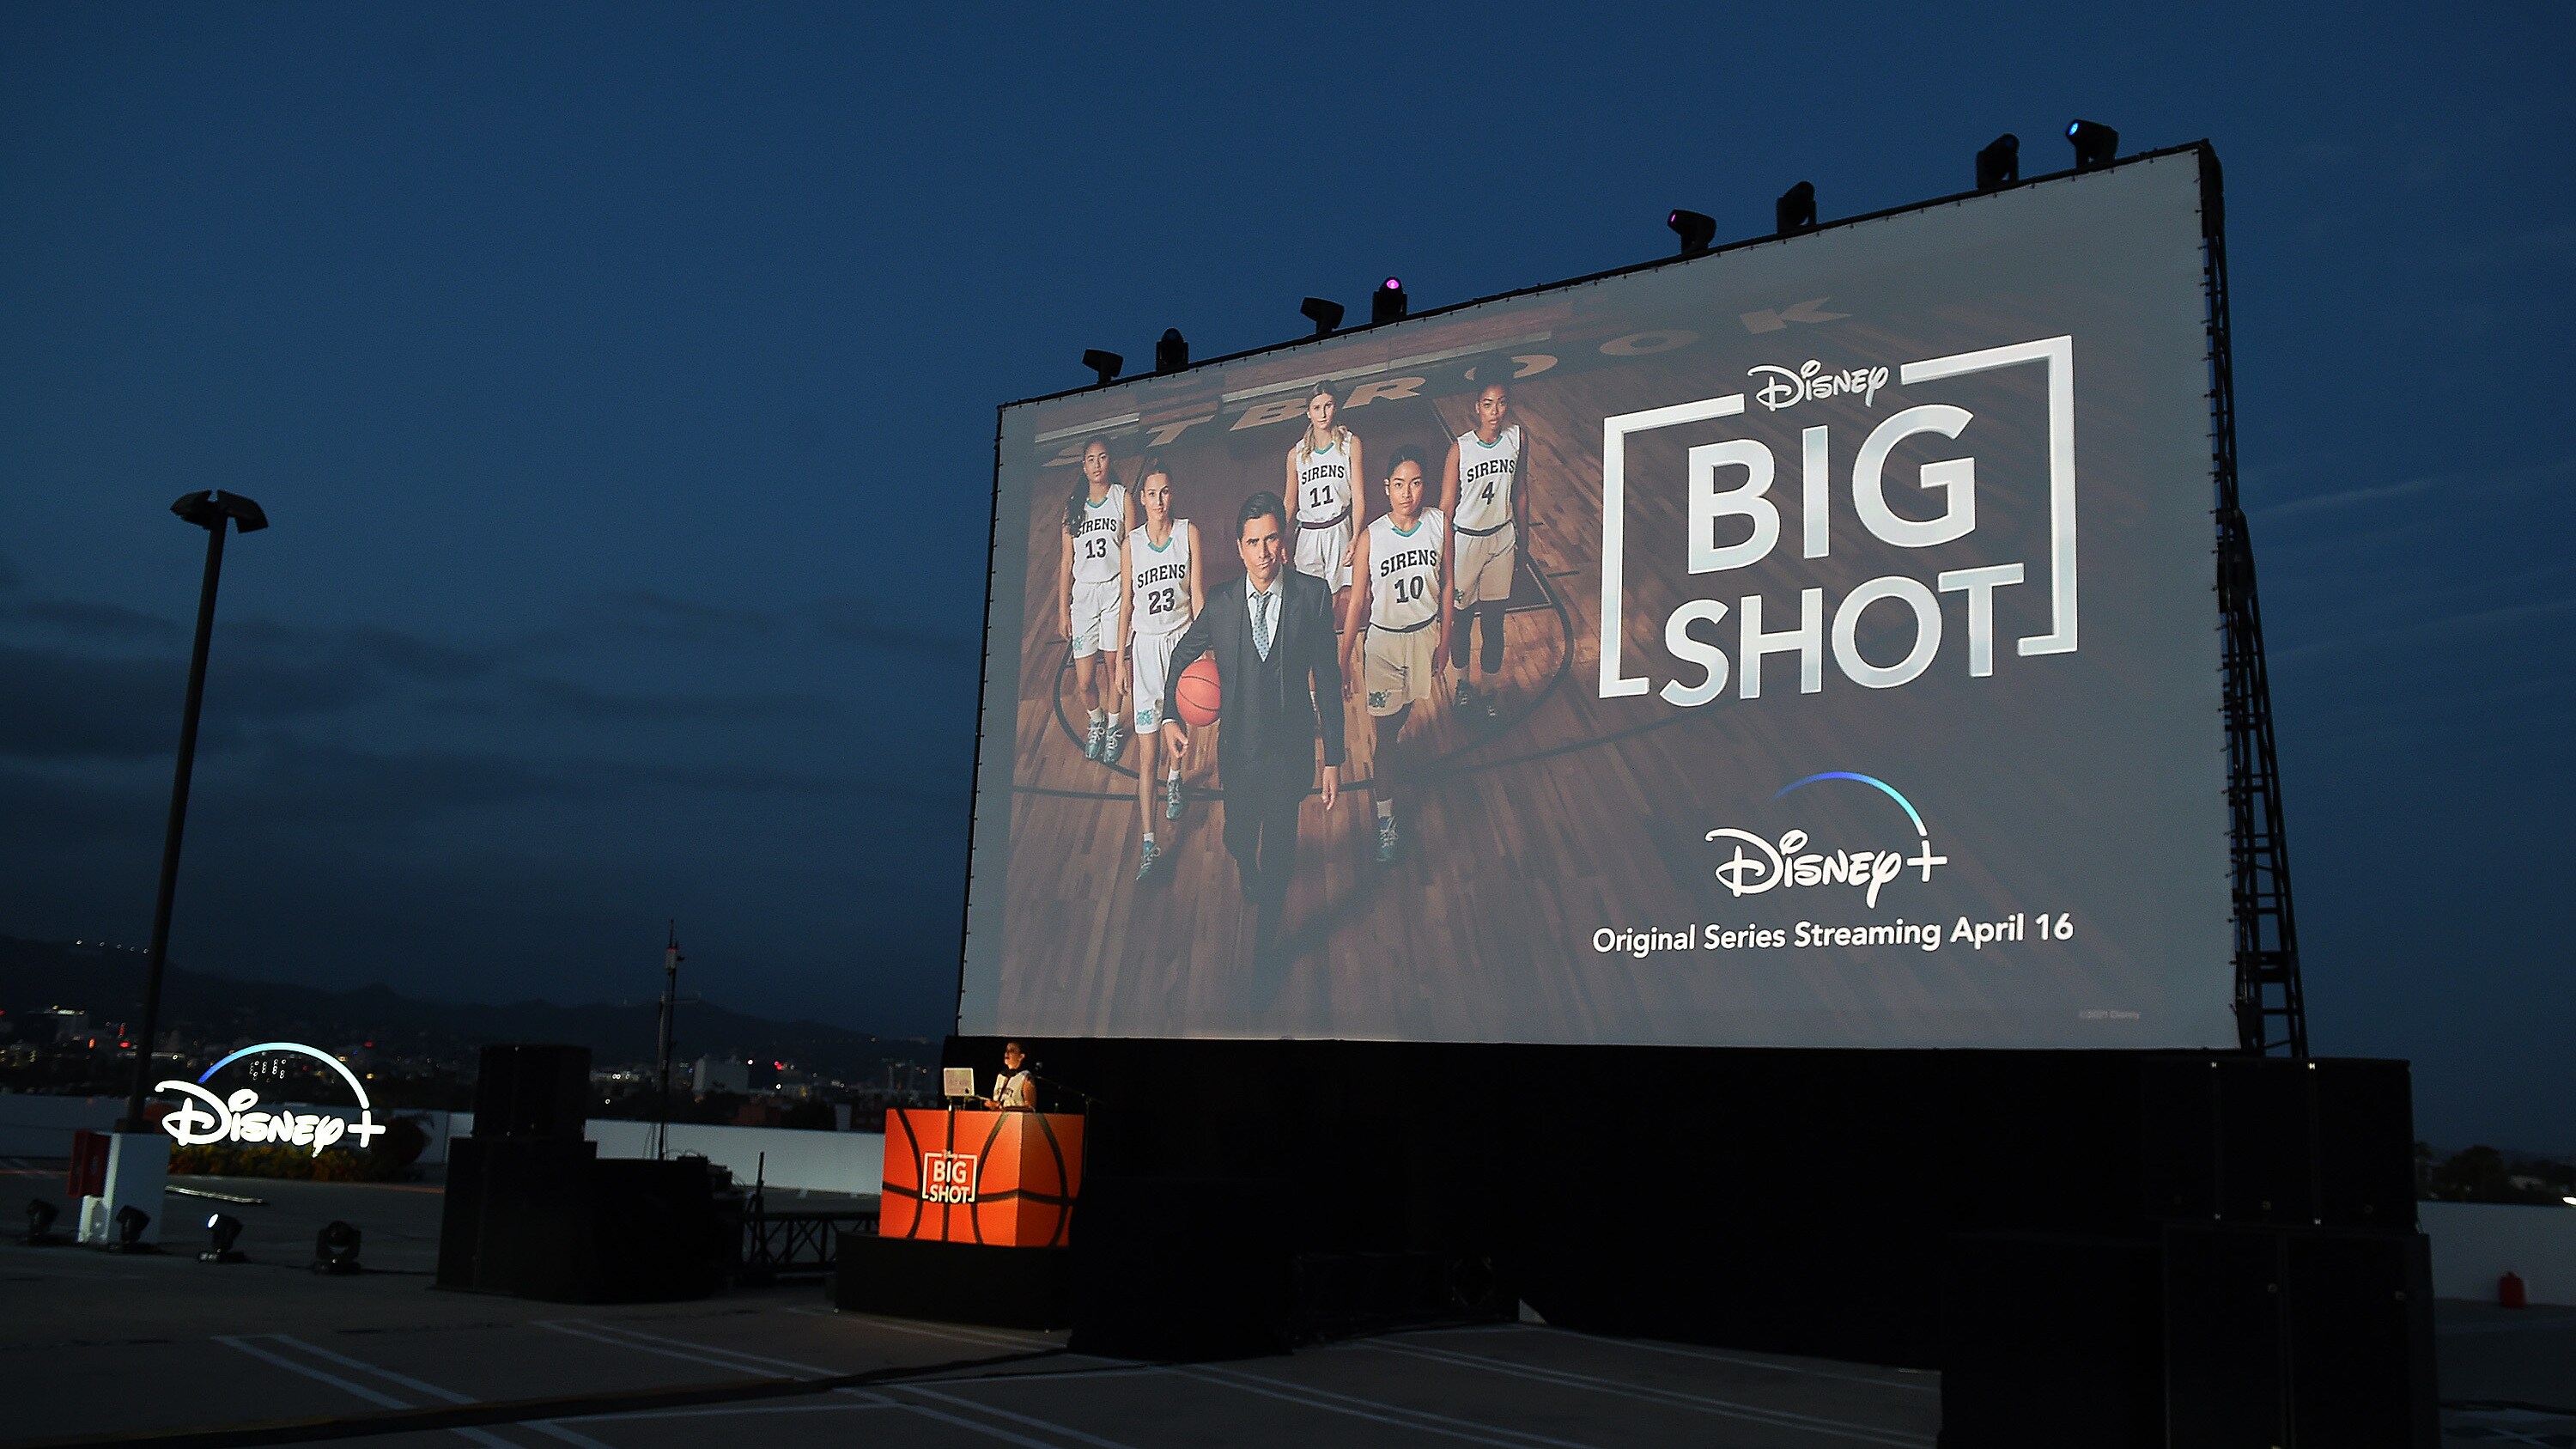 LOS ANGELES, CA - APRIL 14: Disney + hosted the world premiere drive-in screening of the original series ìBIG SHOTî at The Grove in Los Angeles, California on April 14, 2021. (Photo by Frank Micelotta/Disney +/PictureGroup)